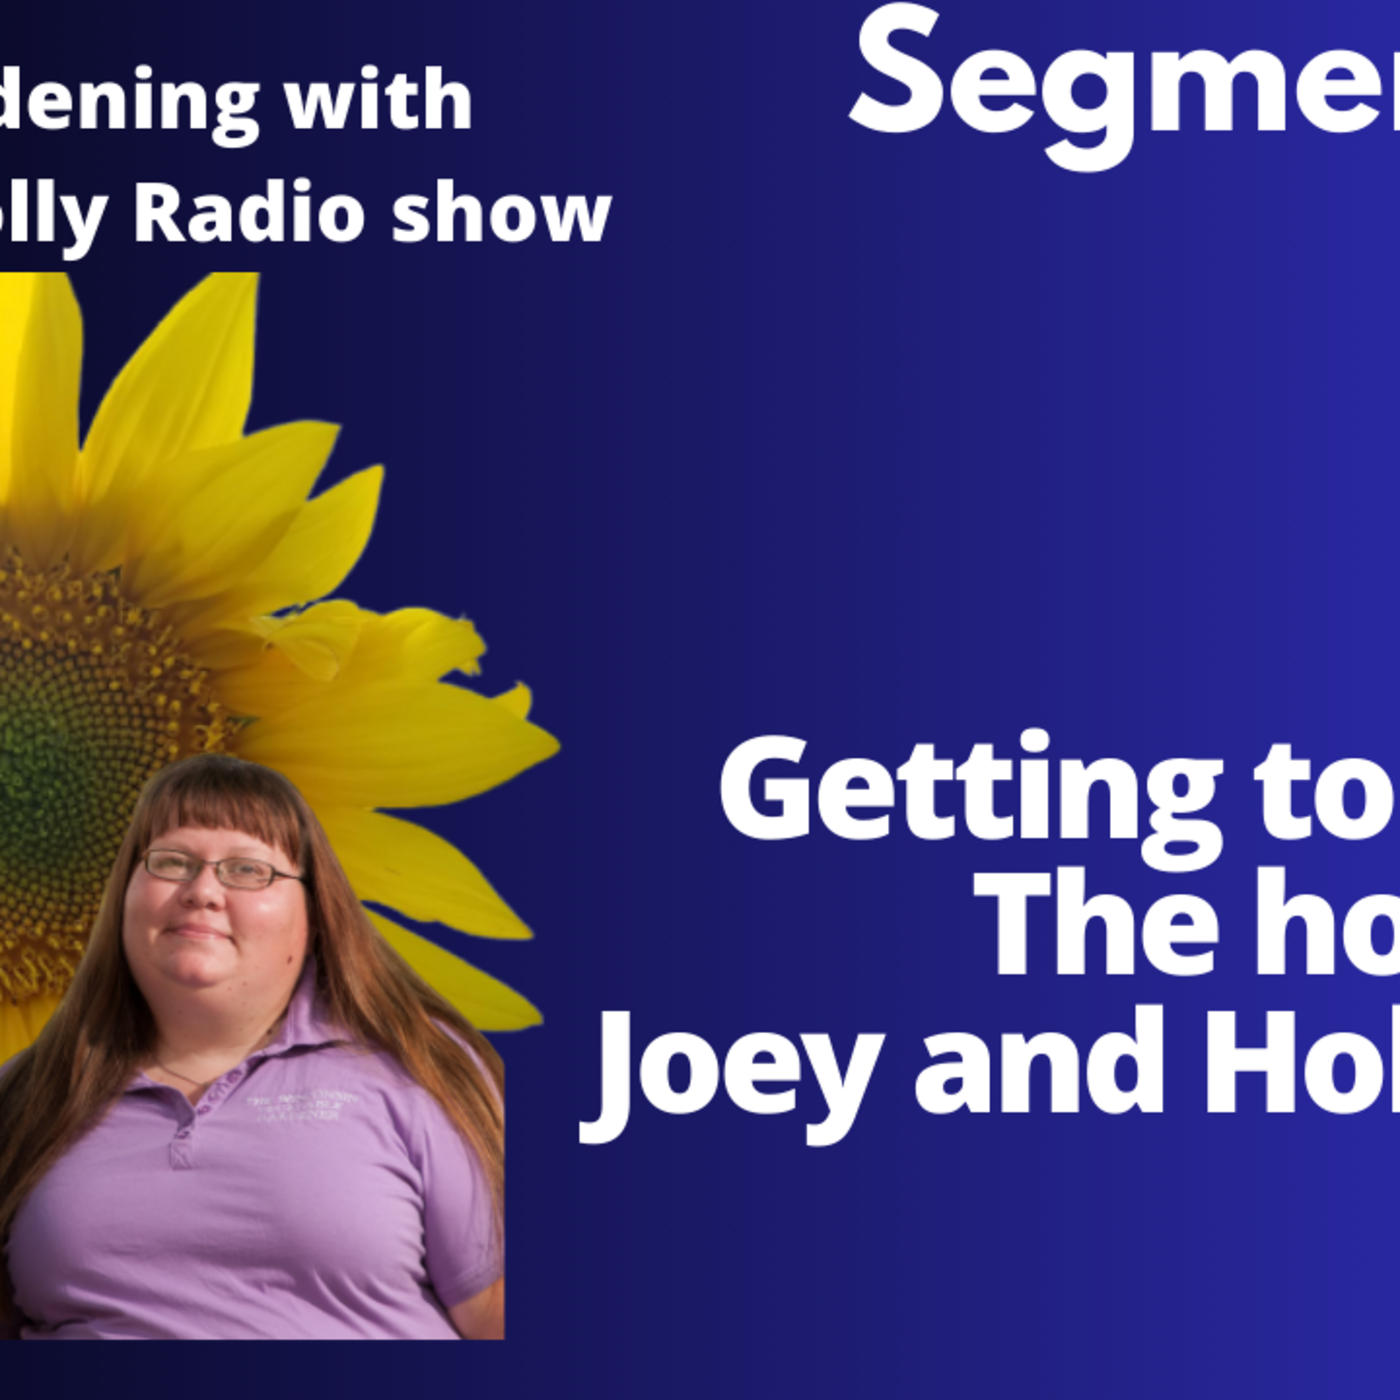 Episode 1199: Seg 3 of S8E9 Getting to know Joey and Holly the Host - The Gardenign with Joey and Holly Radio Show